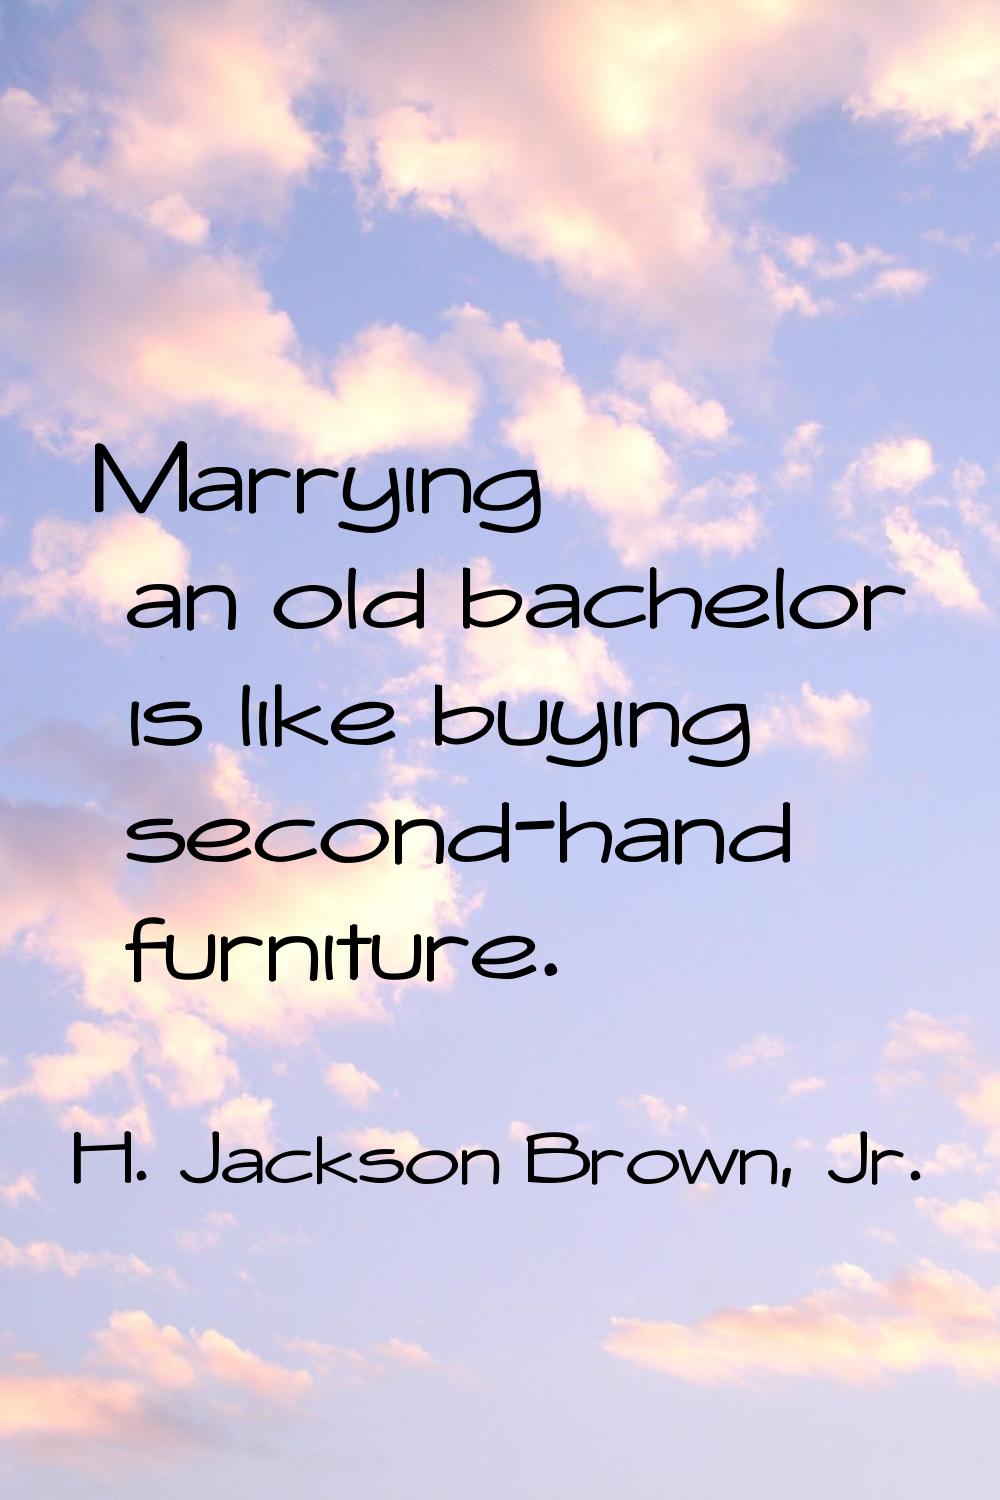 Marrying an old bachelor is like buying second-hand furniture.